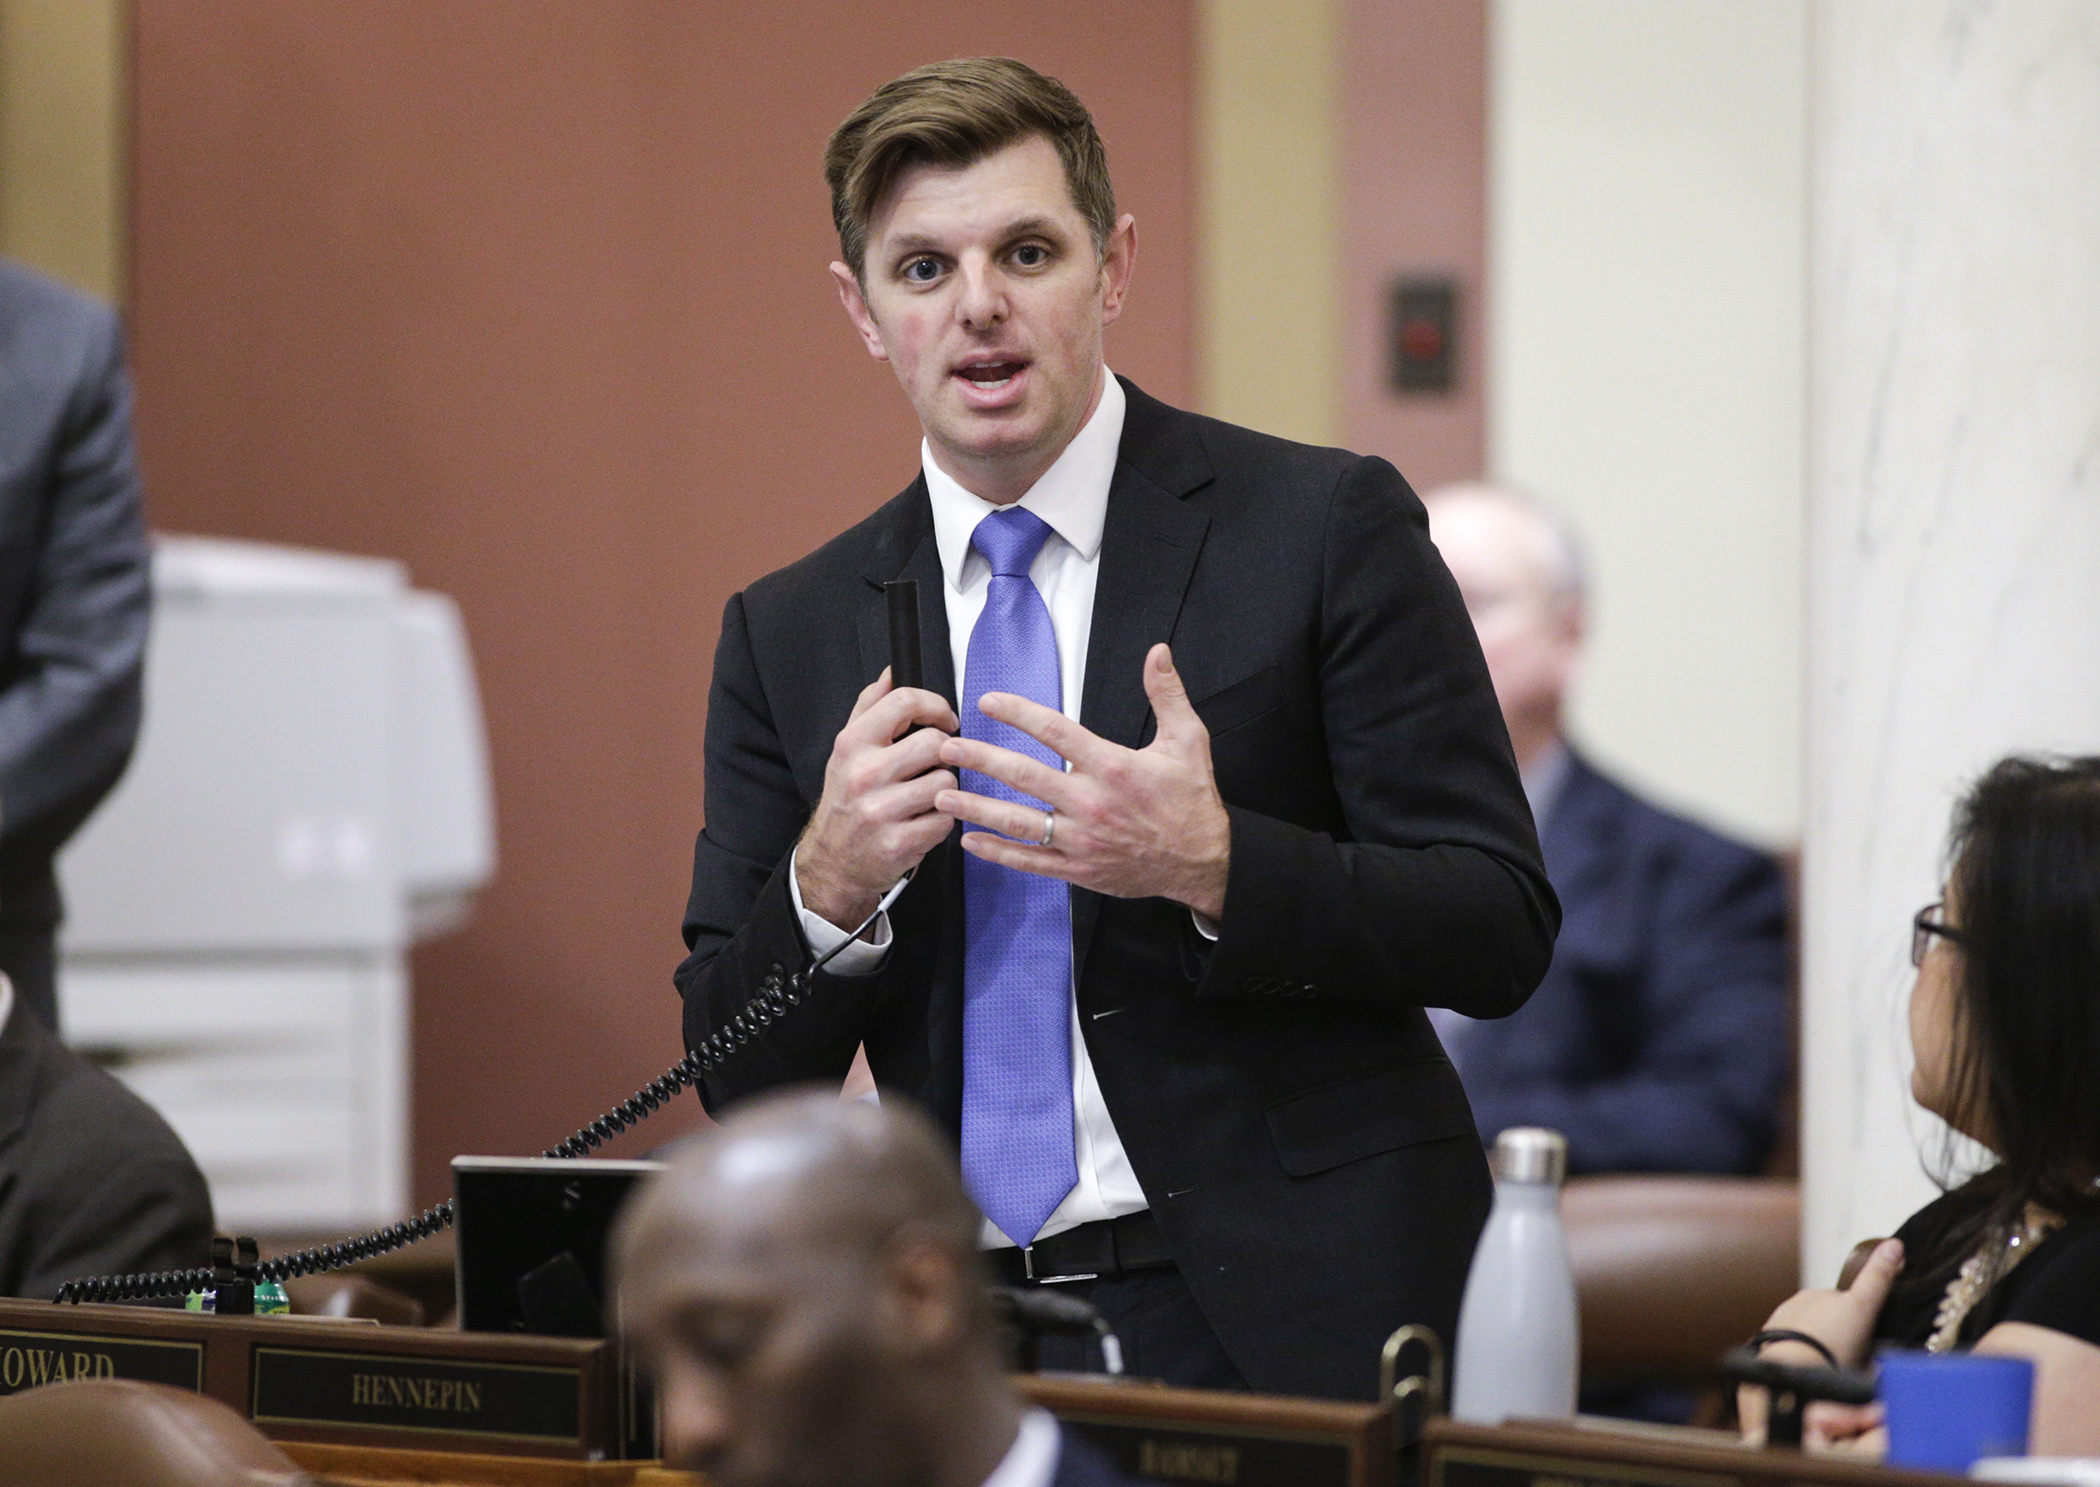 Rep. Mike Howard, who sponsors HF3100, during Feb. 26 House Floor debate on the bill. House Photography file photo